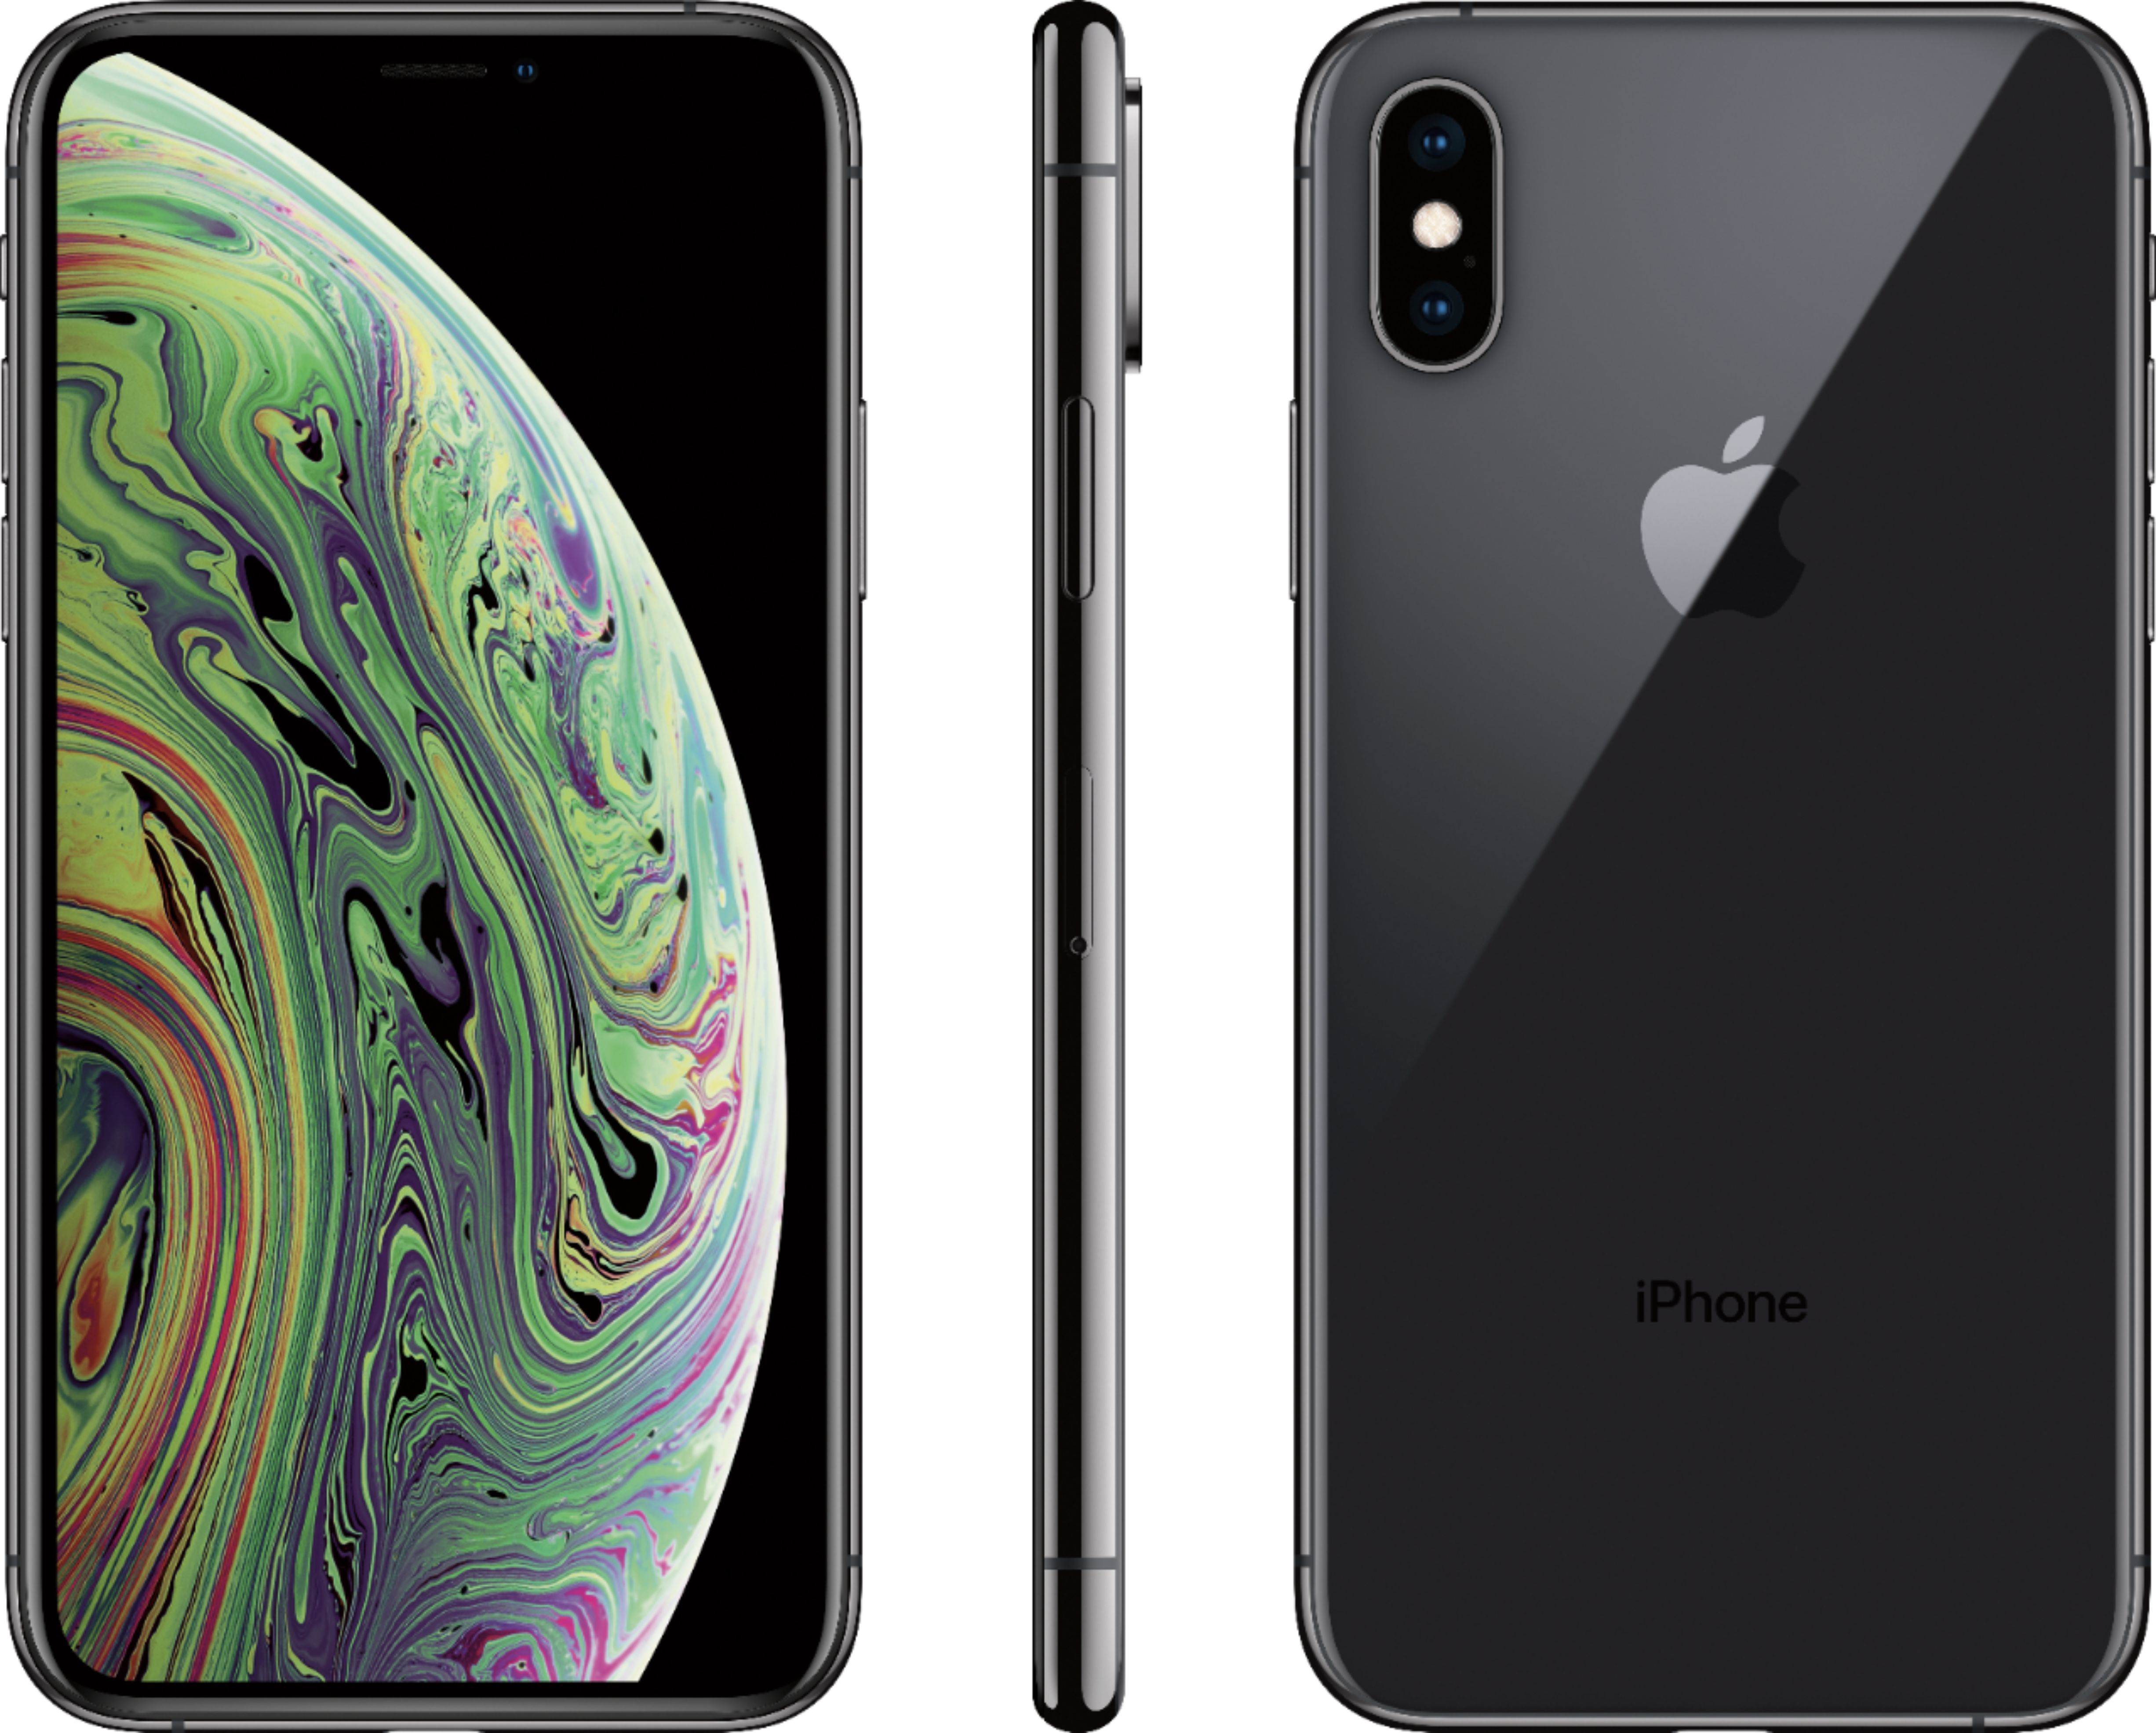 Apple iPhone XS with 64GB Memory Cell Phone (Unlocked) Space Gray MTAG2LL/A  - Best Buy